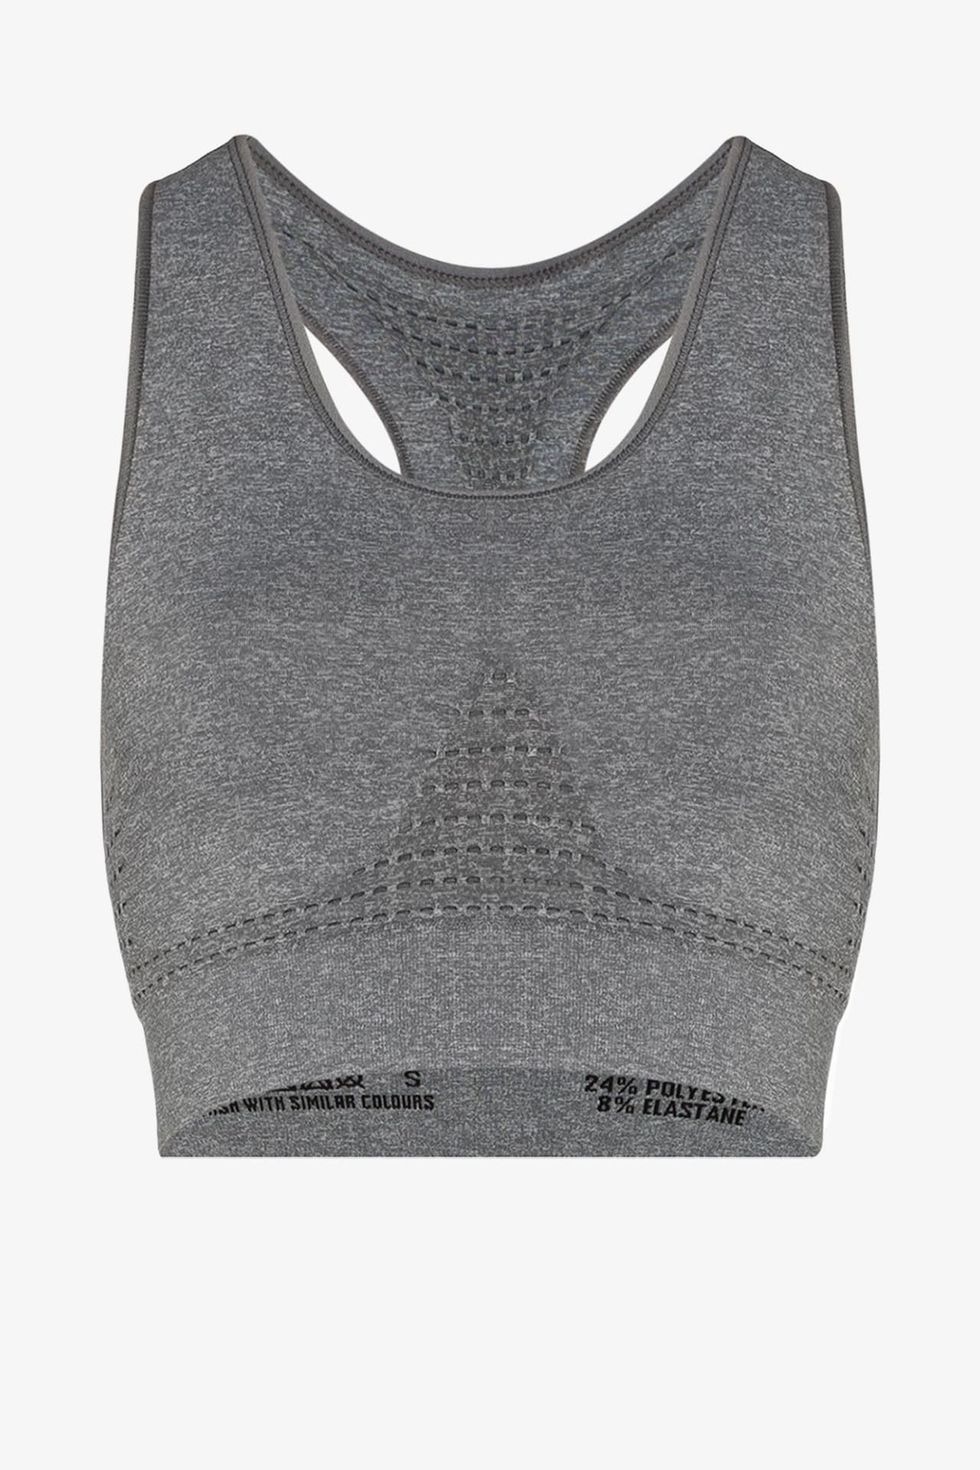 Sweaty Betty's Black Friday Sale Includes 30% Off Site-Wide